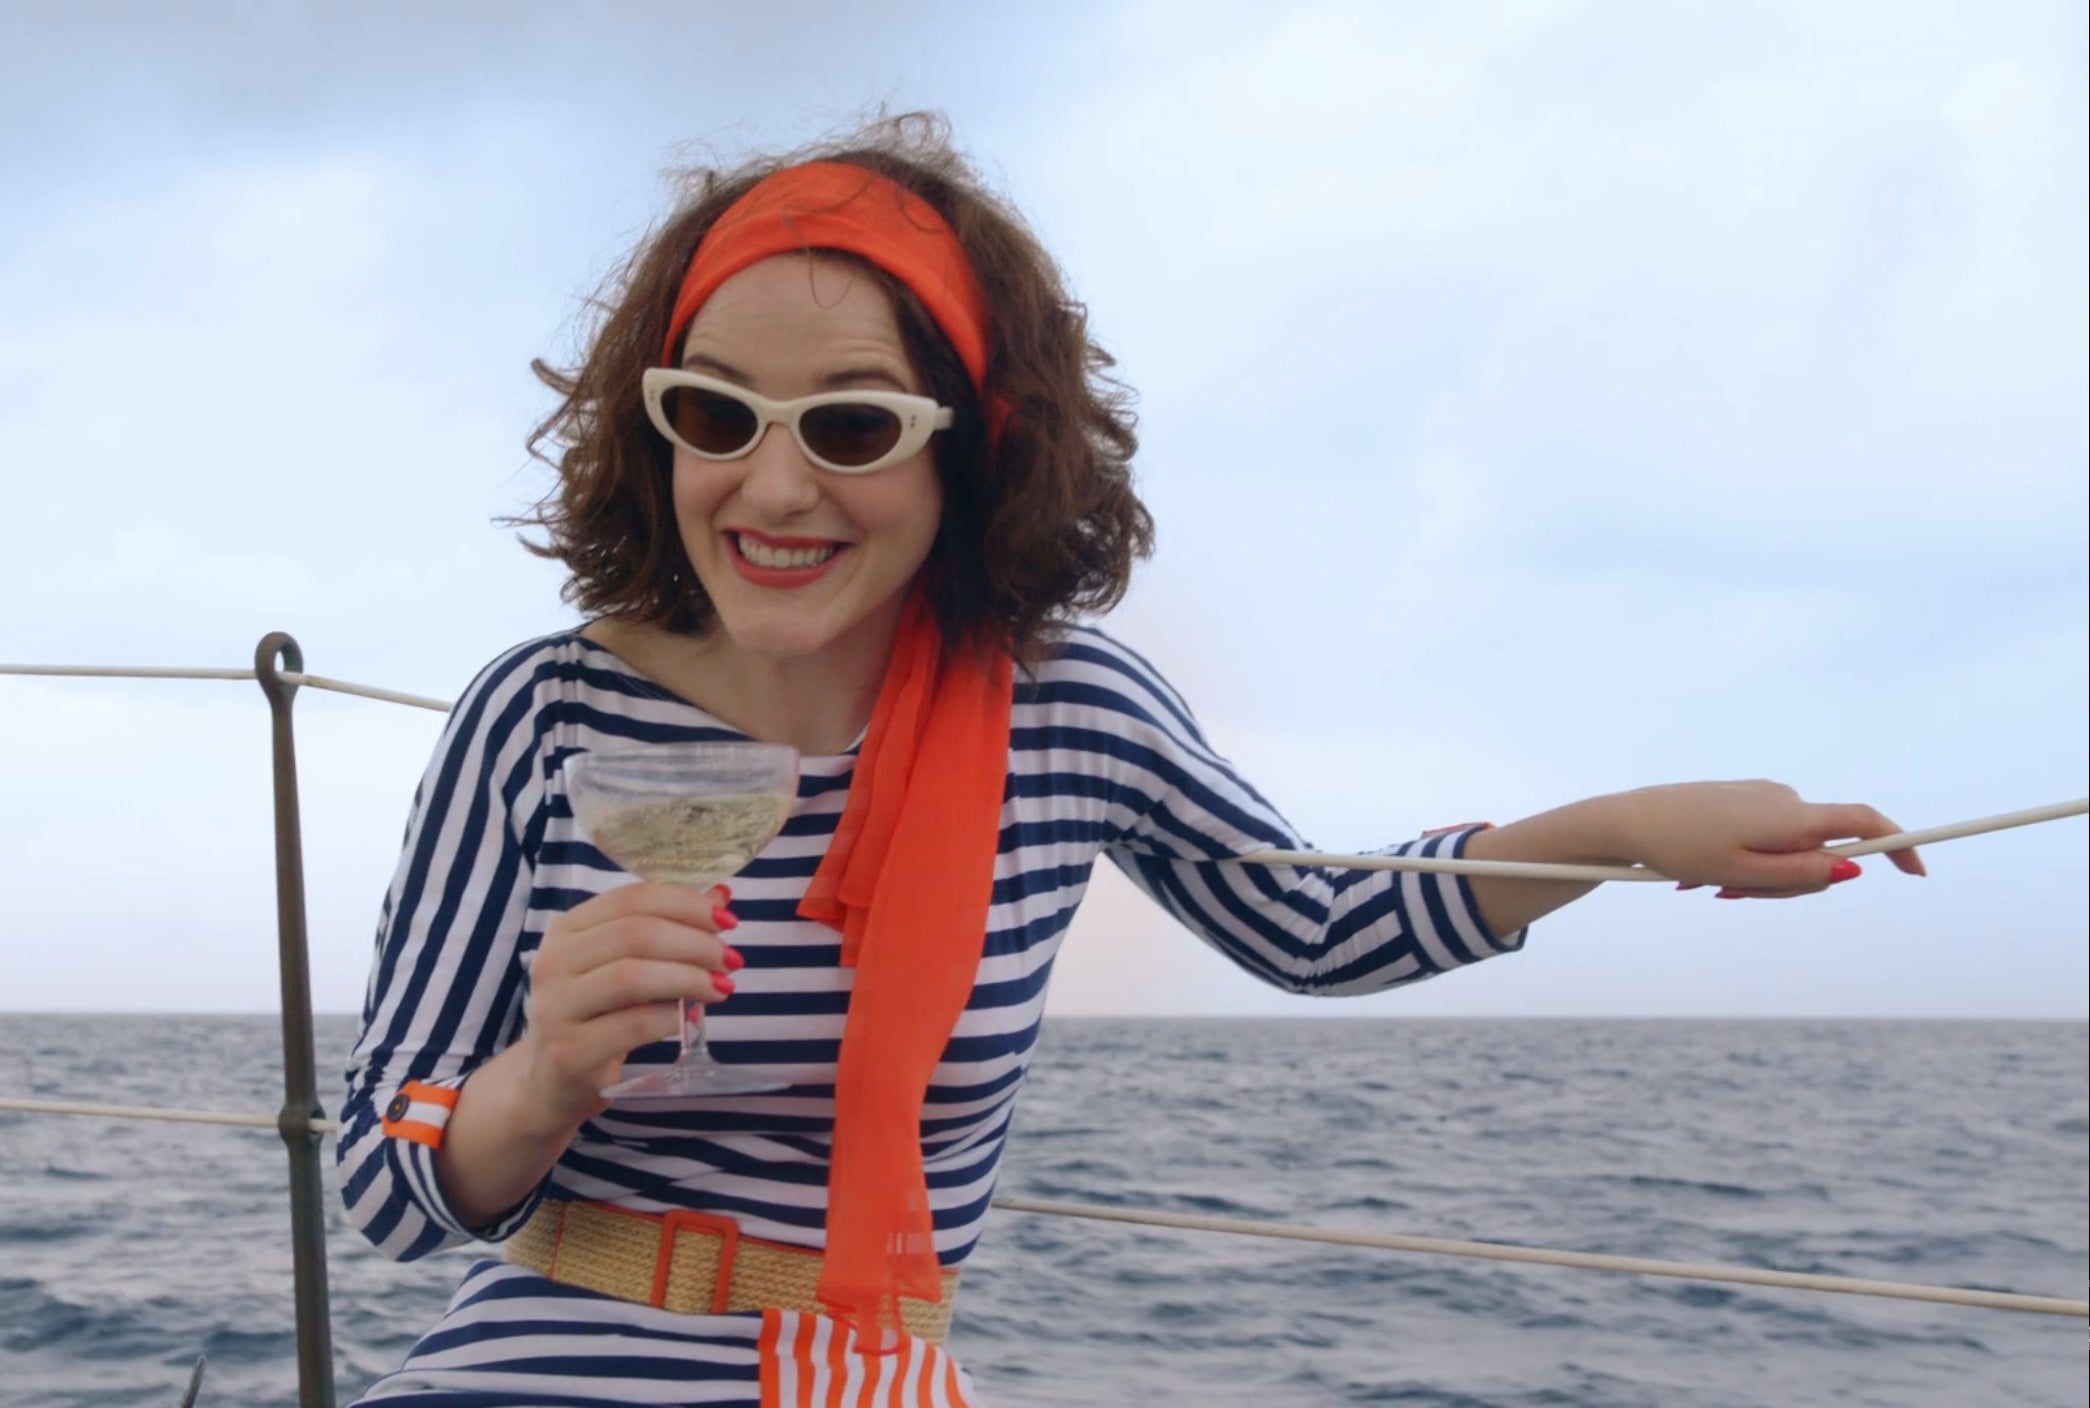 Midge on a boat holding a drink